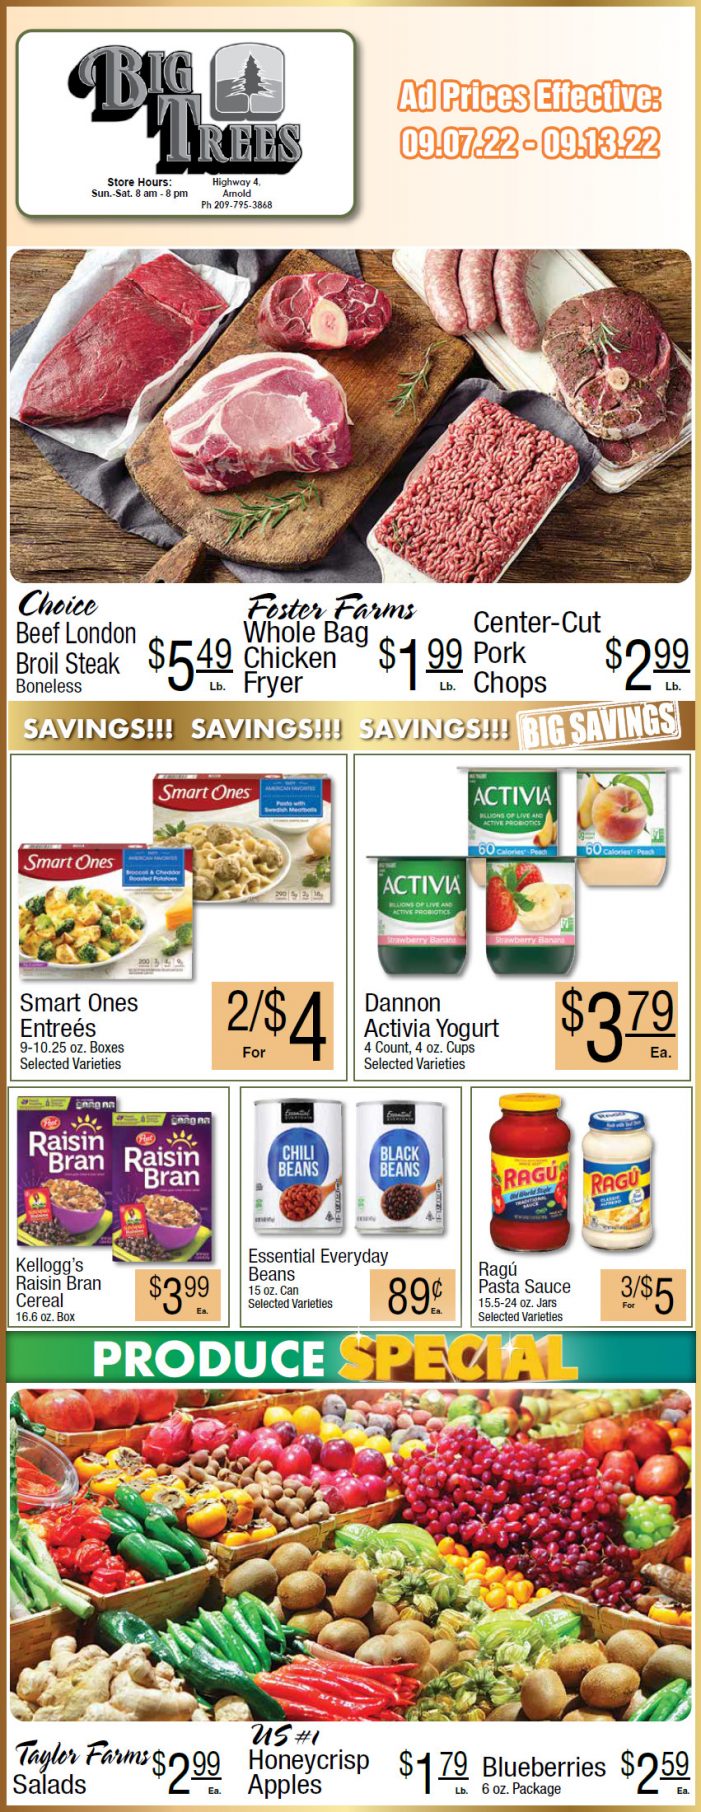 Big Trees Market Weekly Ad & Grocery Specials Through Sept 7 – Sept 13th  Shop Local & Save!!